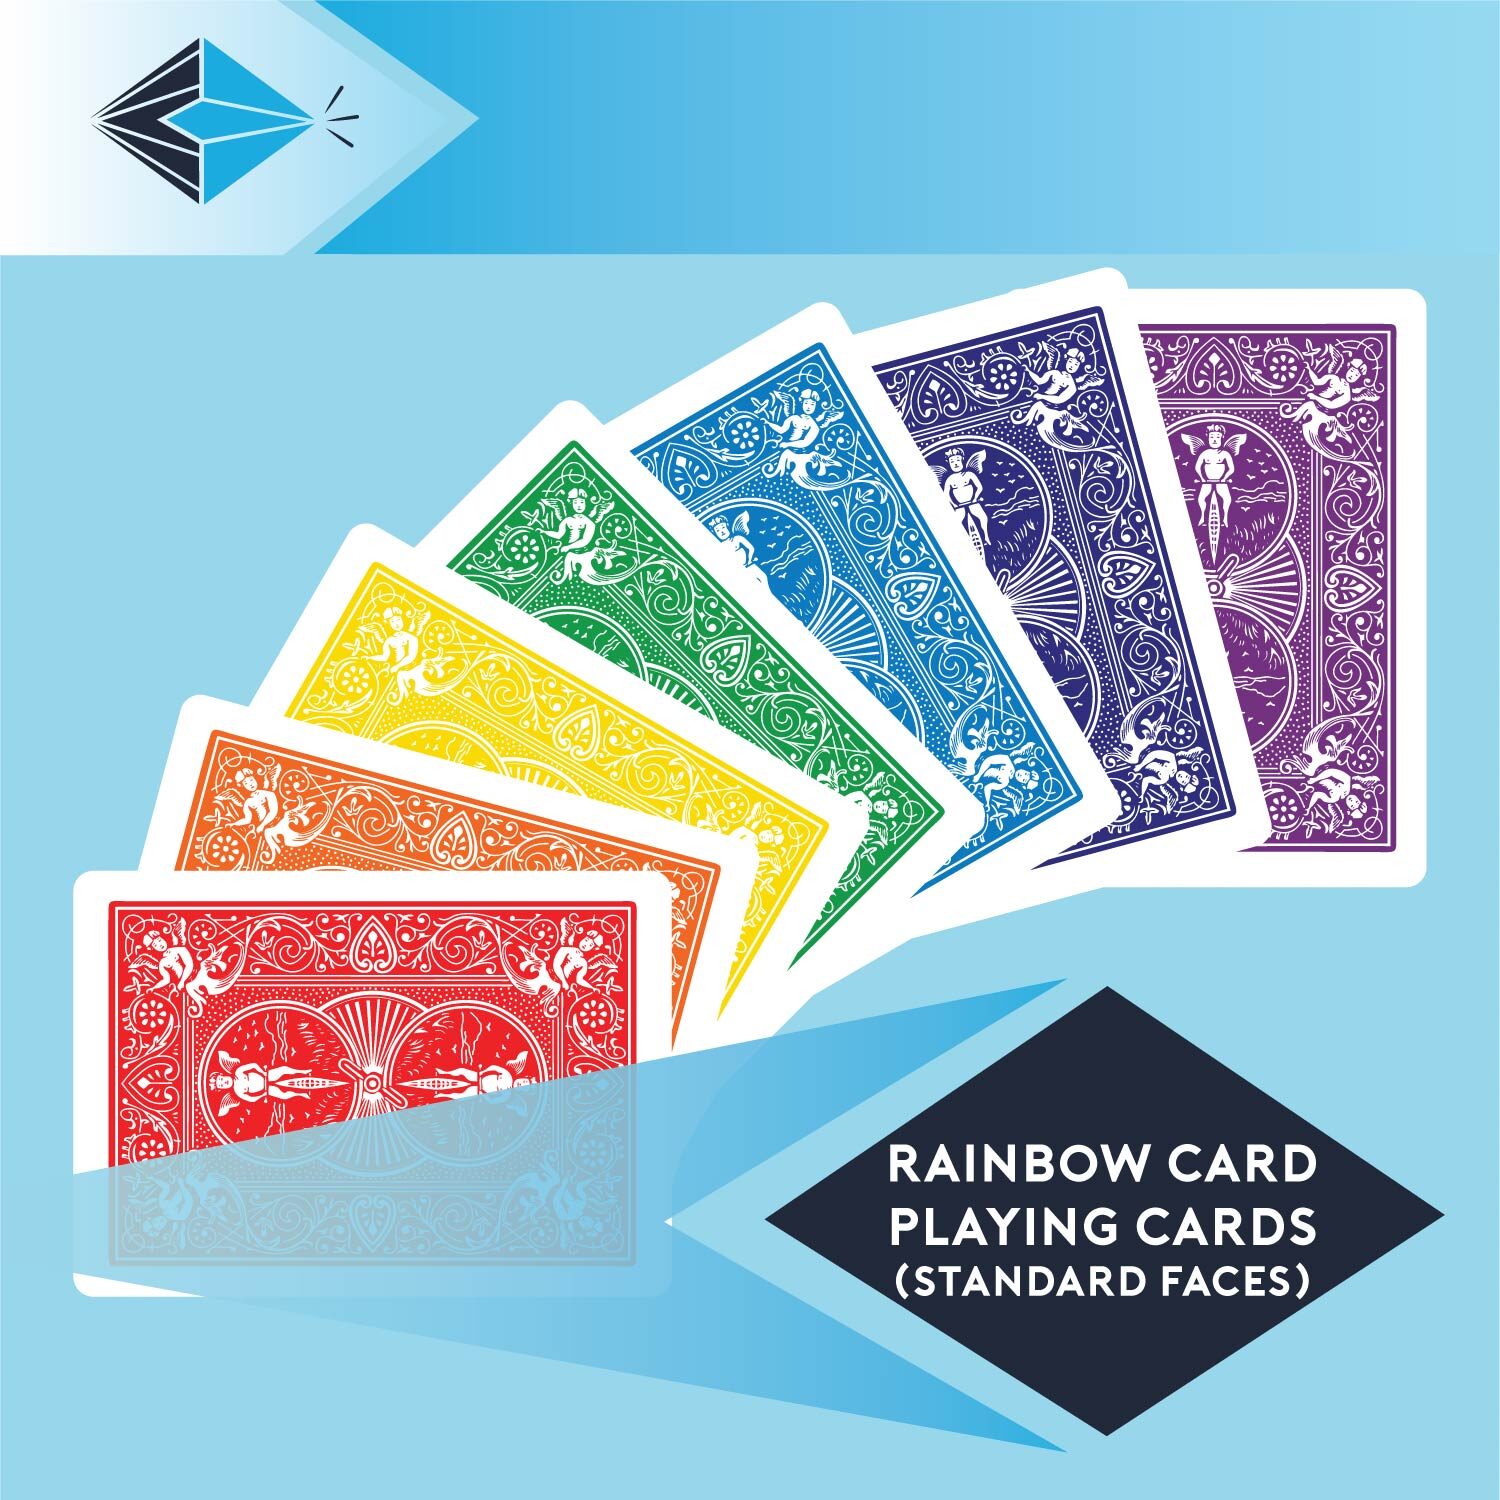 Rainbow card playing cards printed onto Bicycle standard faces by printbymagic magicians printers Stockport Manchester UK